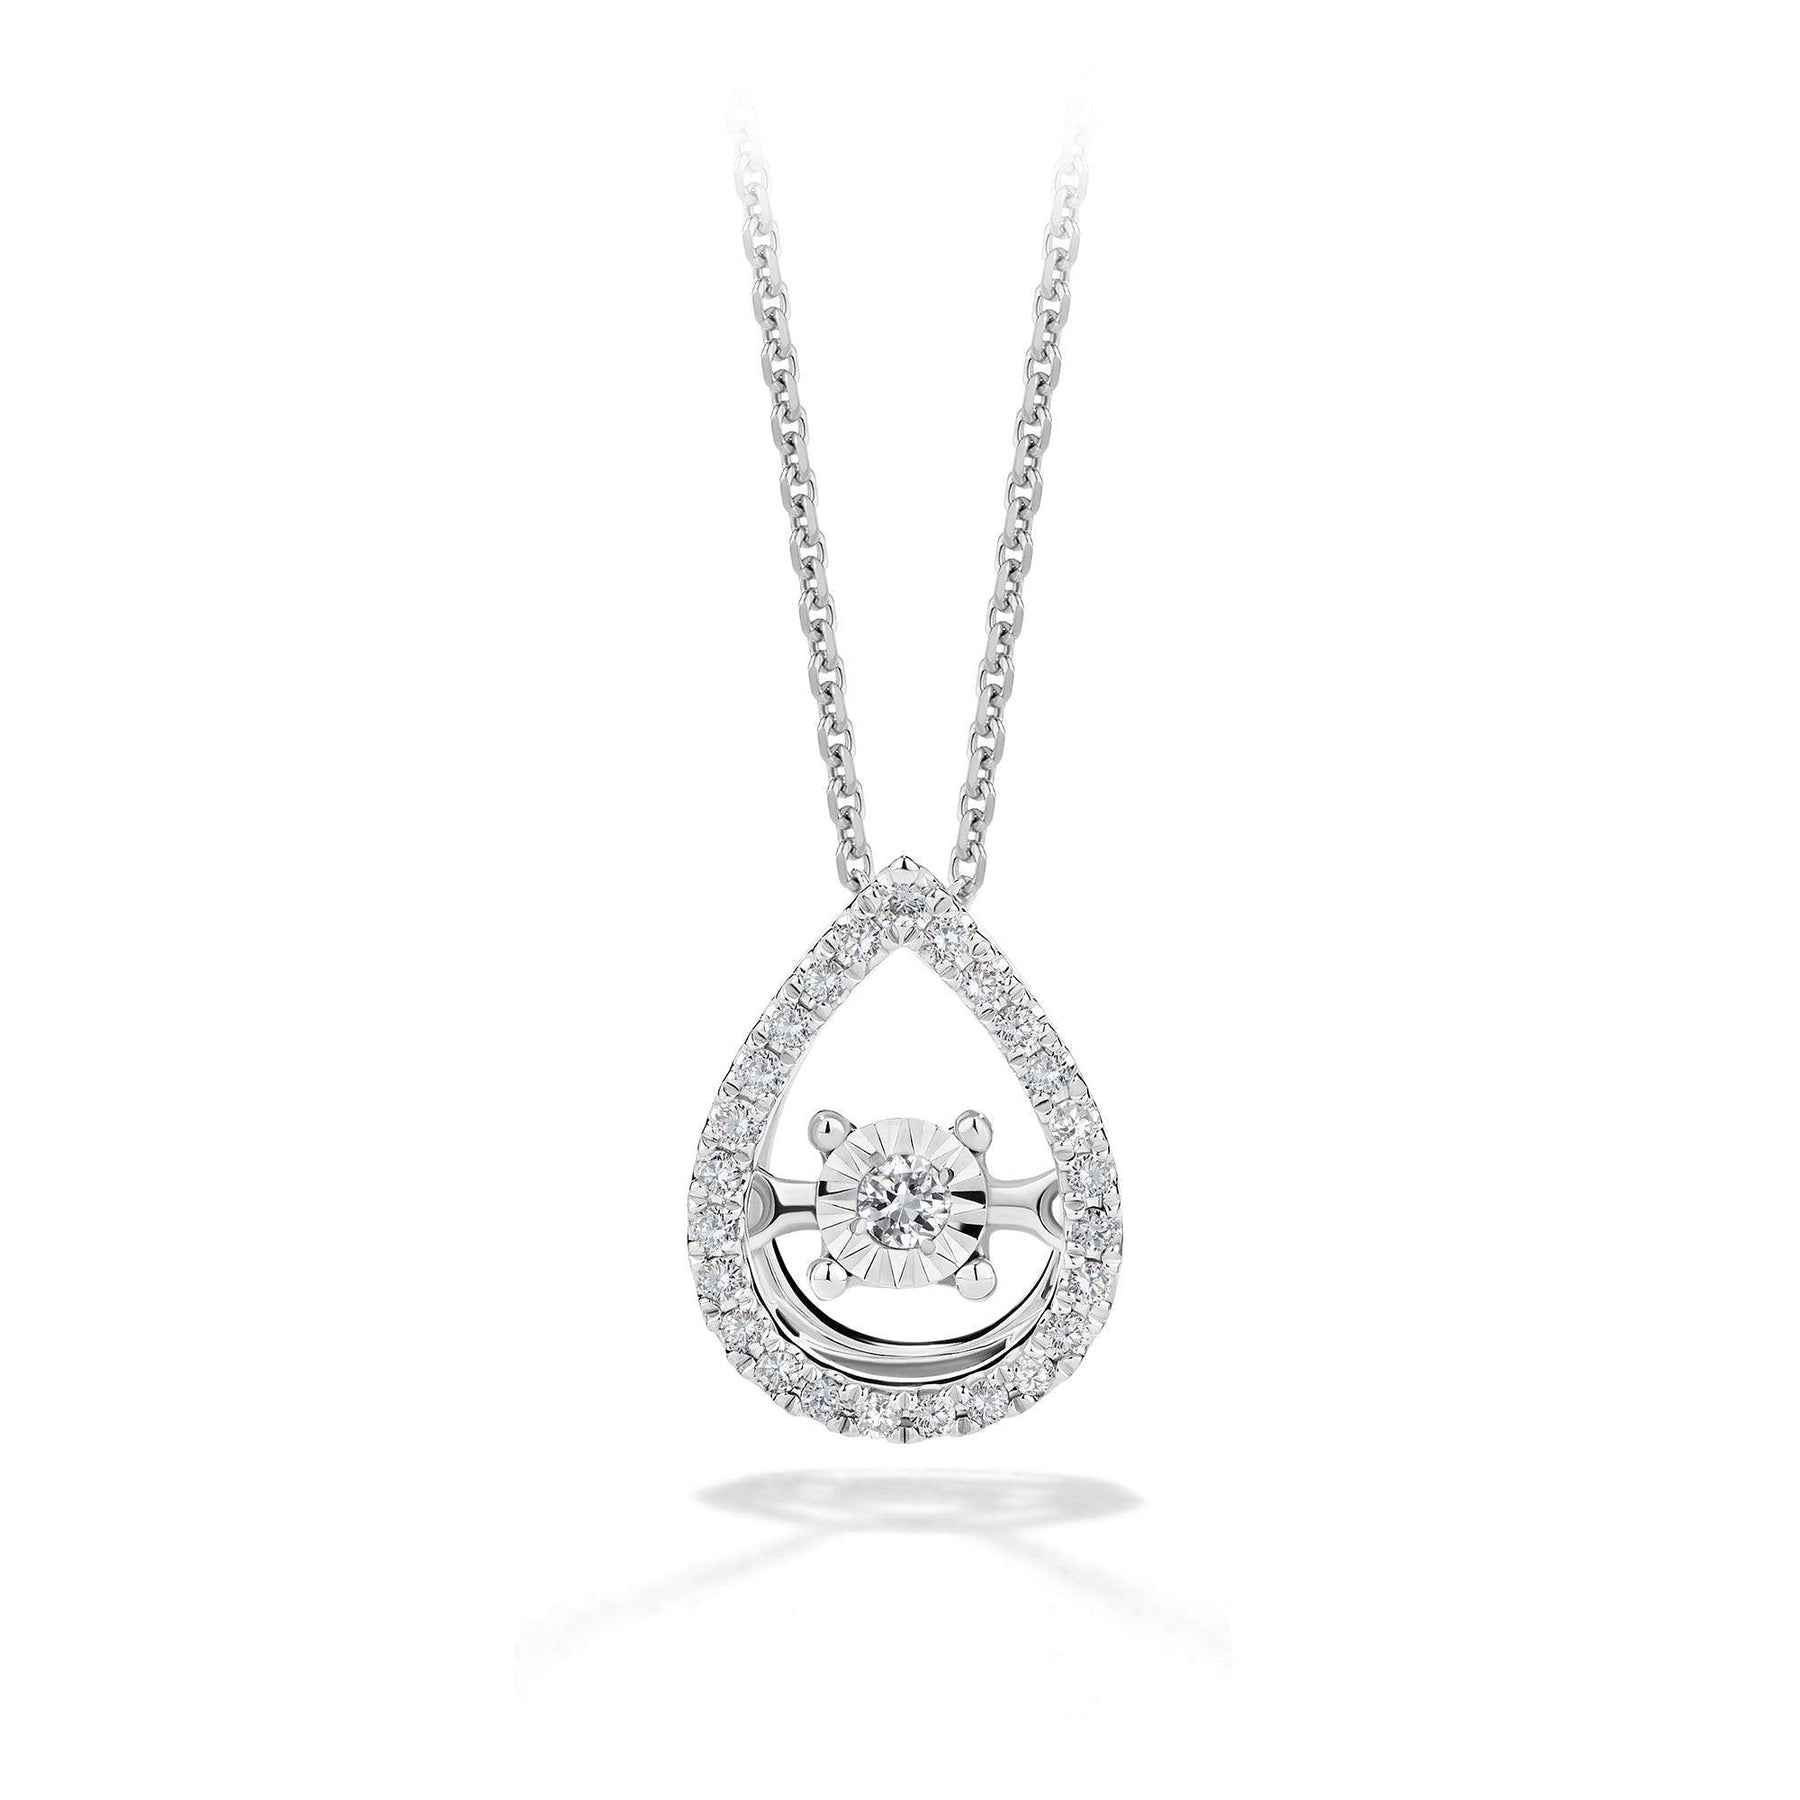 Dancing Diamond Pear Halo Pendant in 9ct White Gold - Wallace Bishop